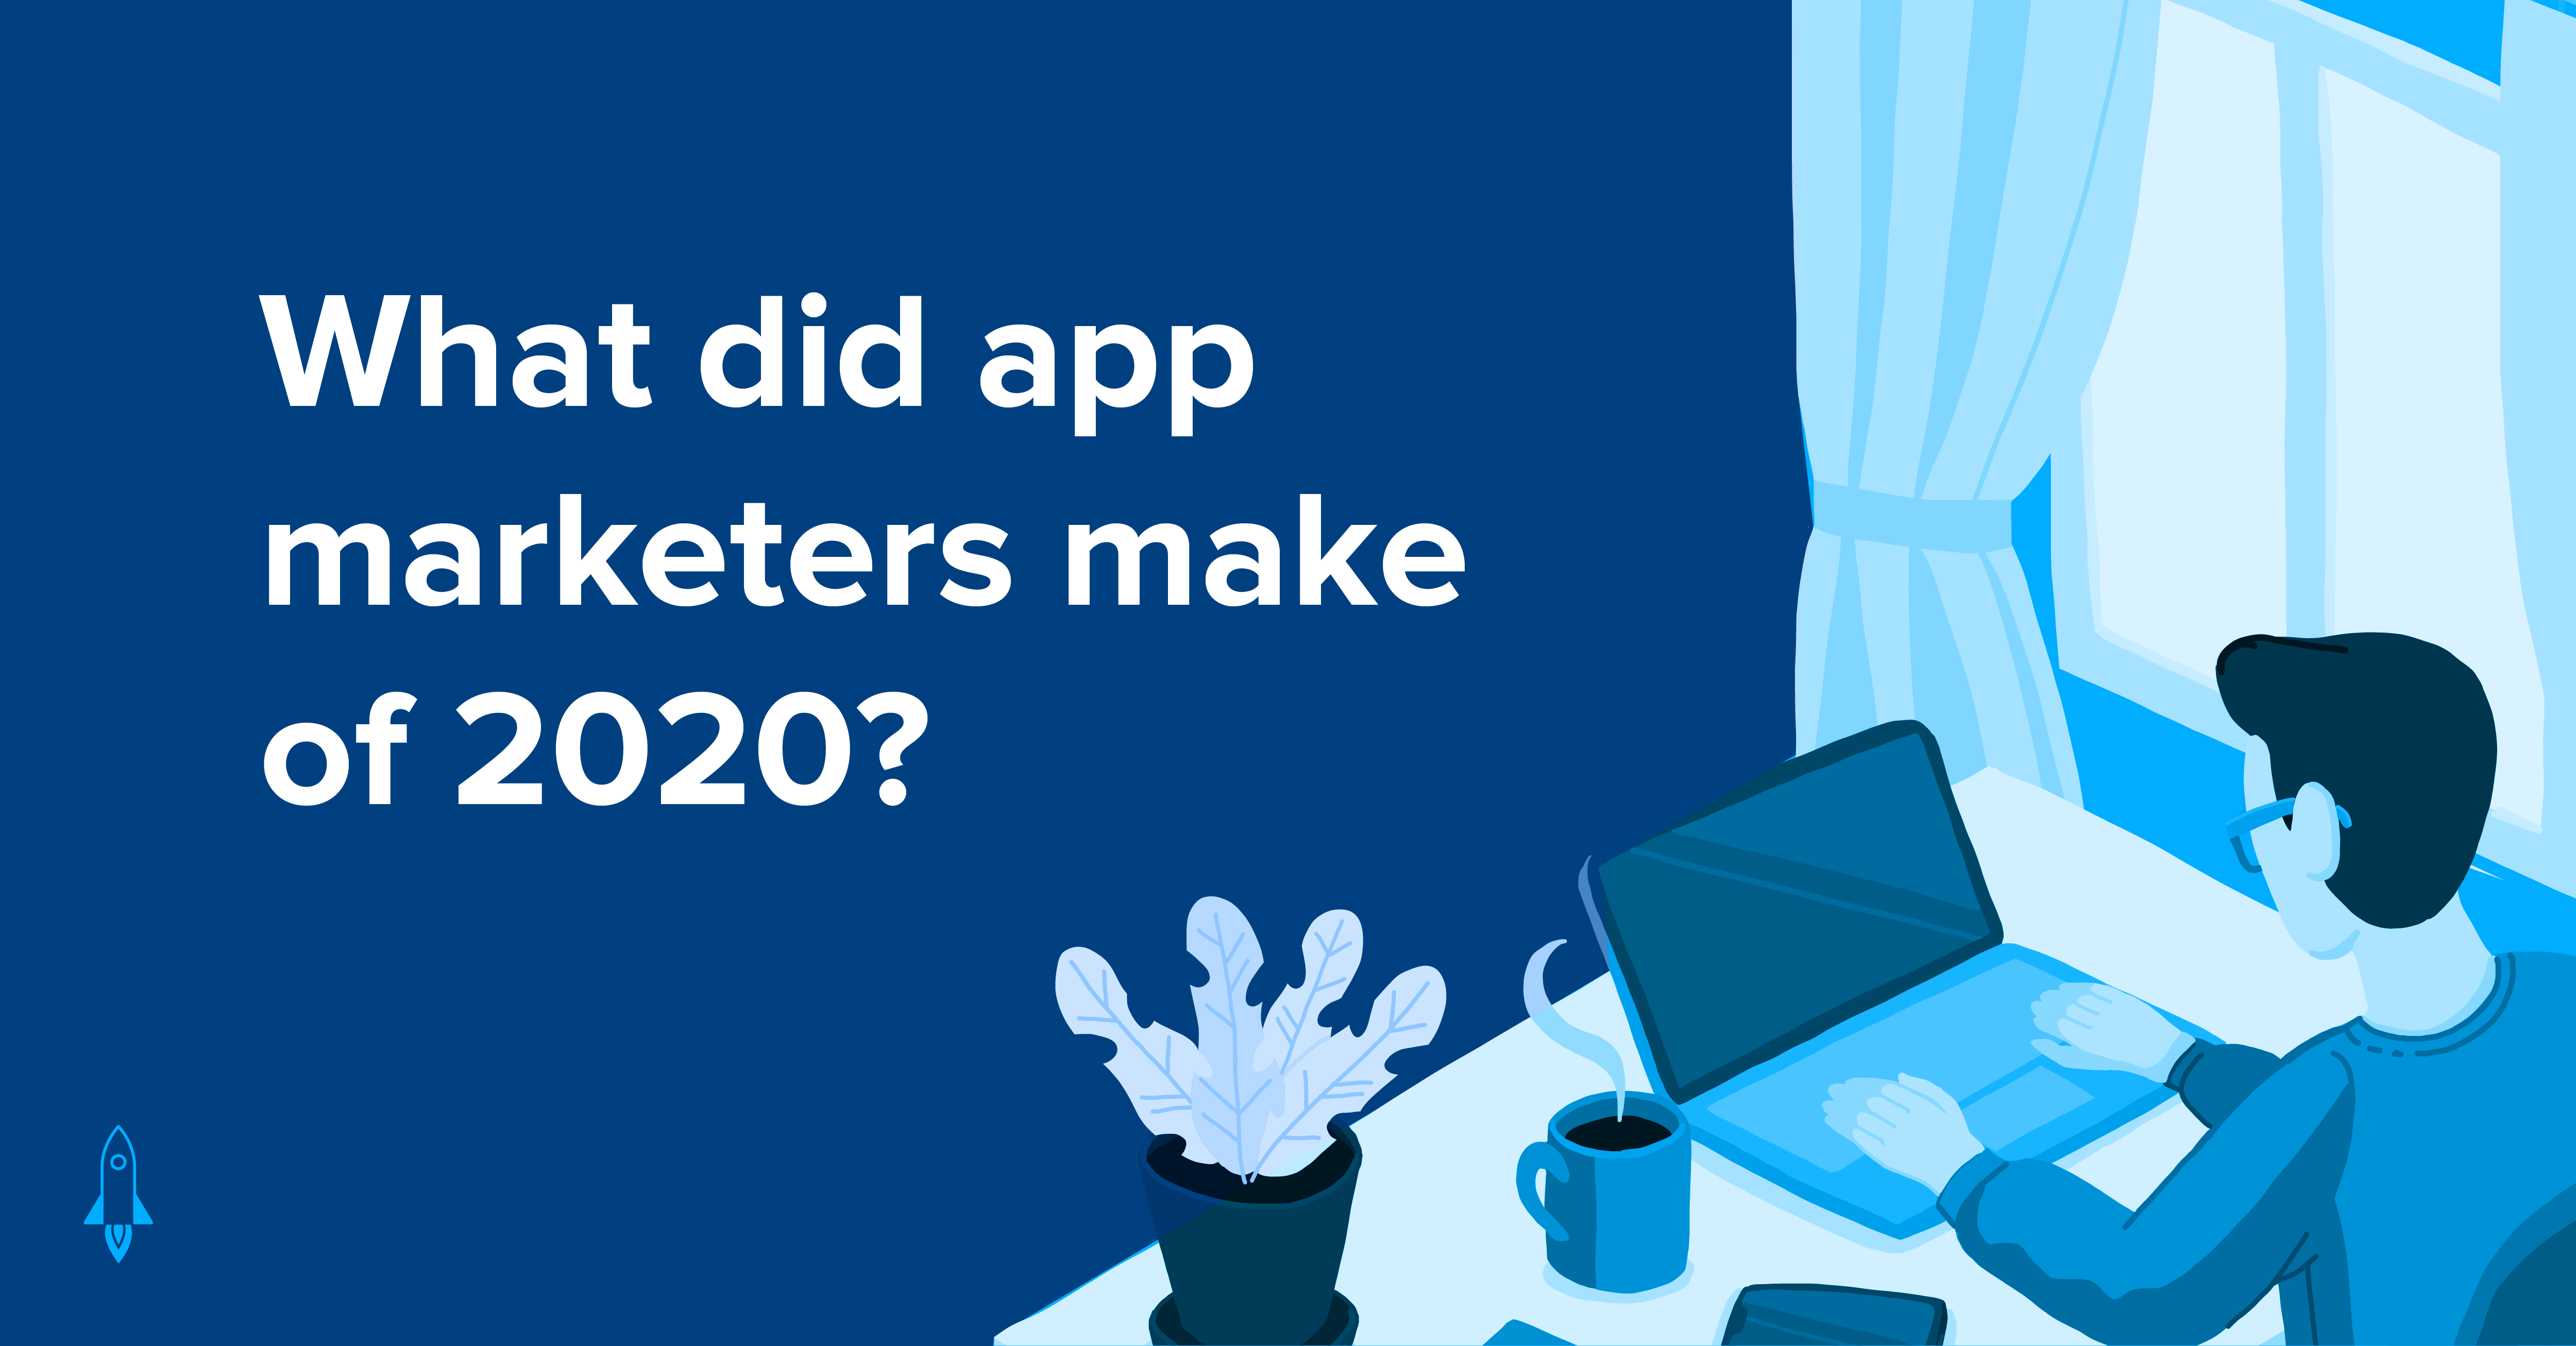 What Did App Marketers Make of 2020?